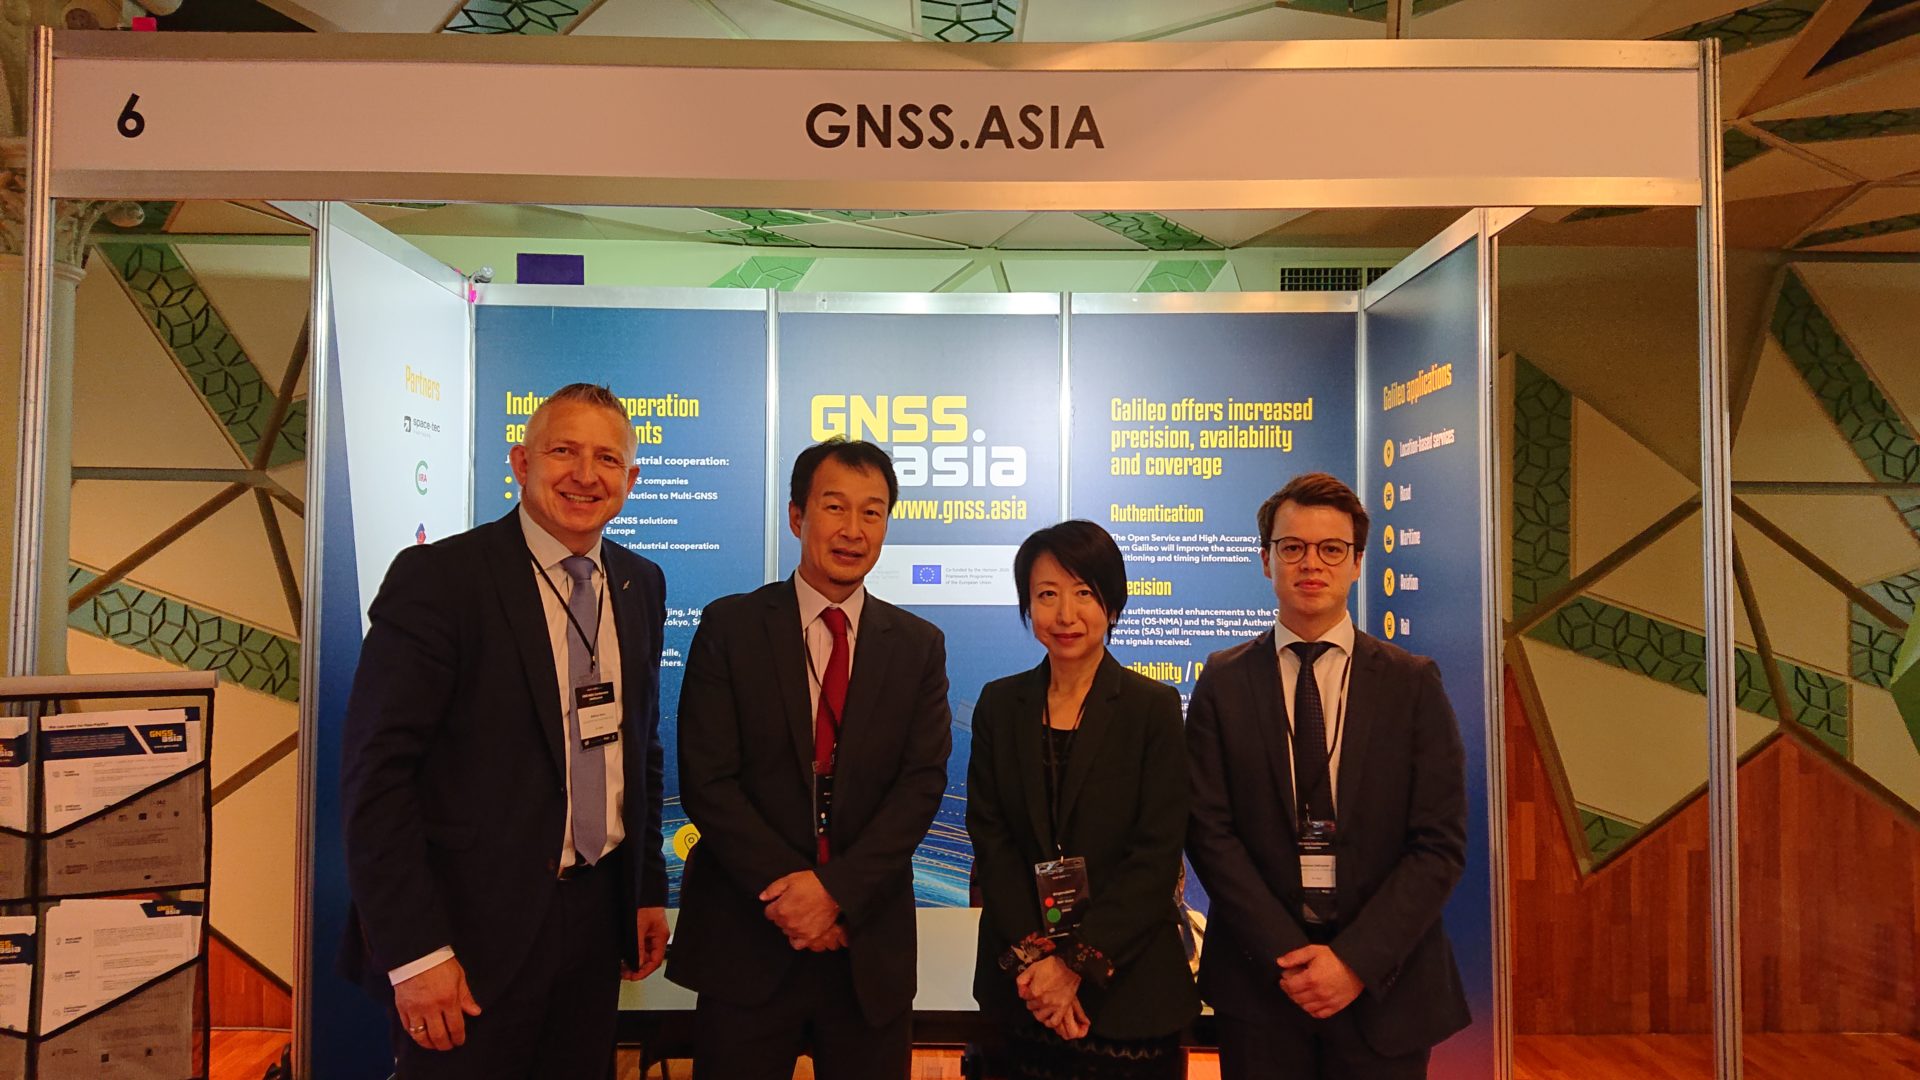 Successful Discussions at Multi-GNSS Asia Conference in Australia